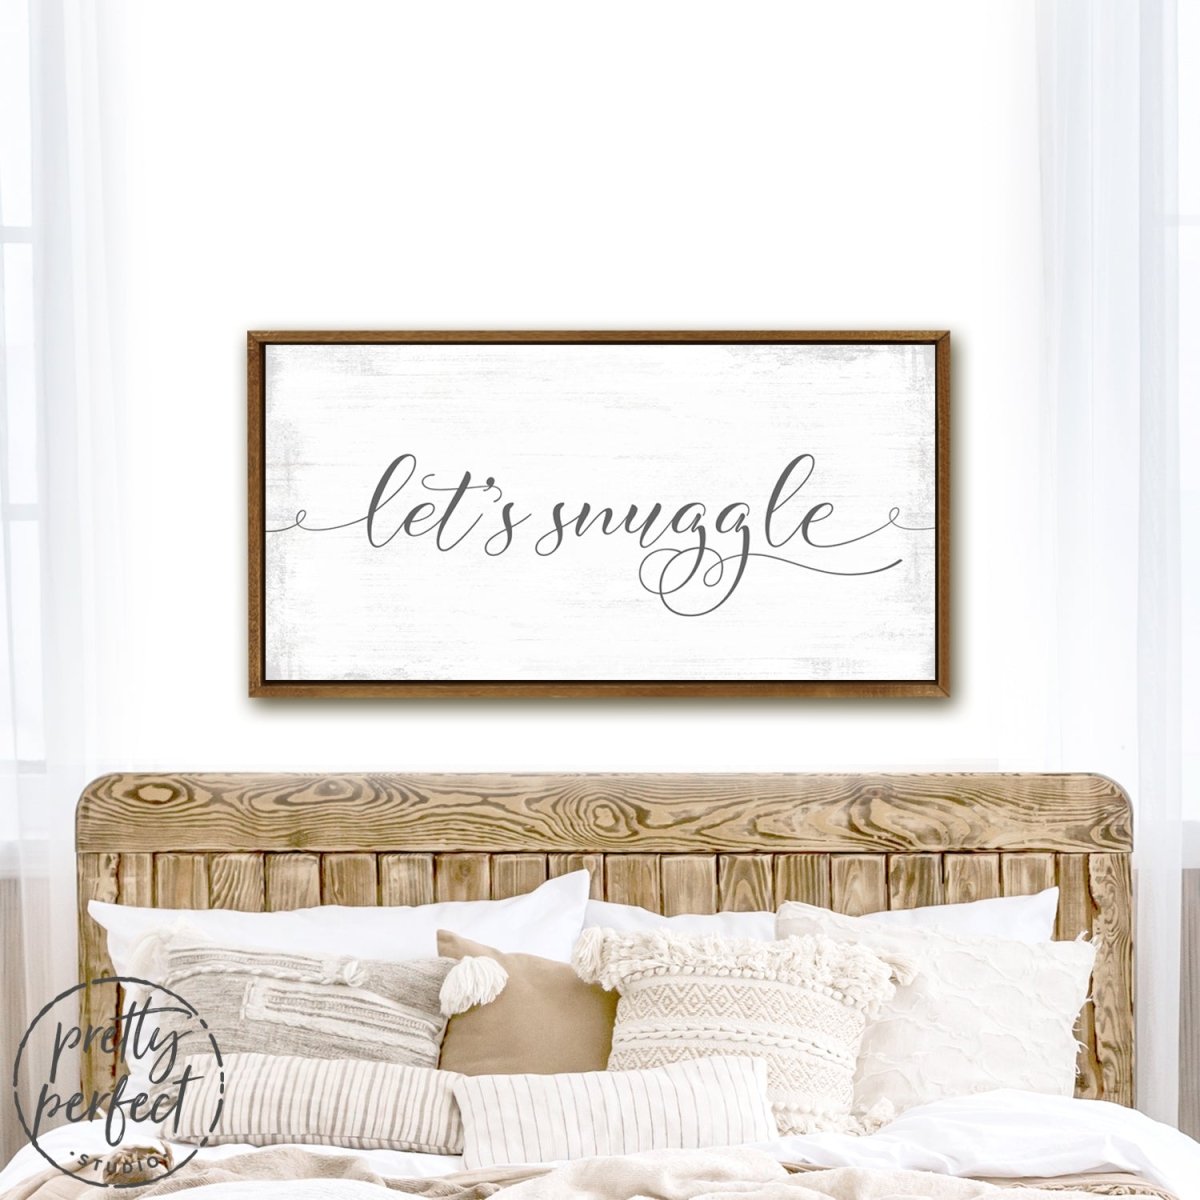 Let's Snuggle Bedroom Sign Above Bed - Pretty Perfect Studio